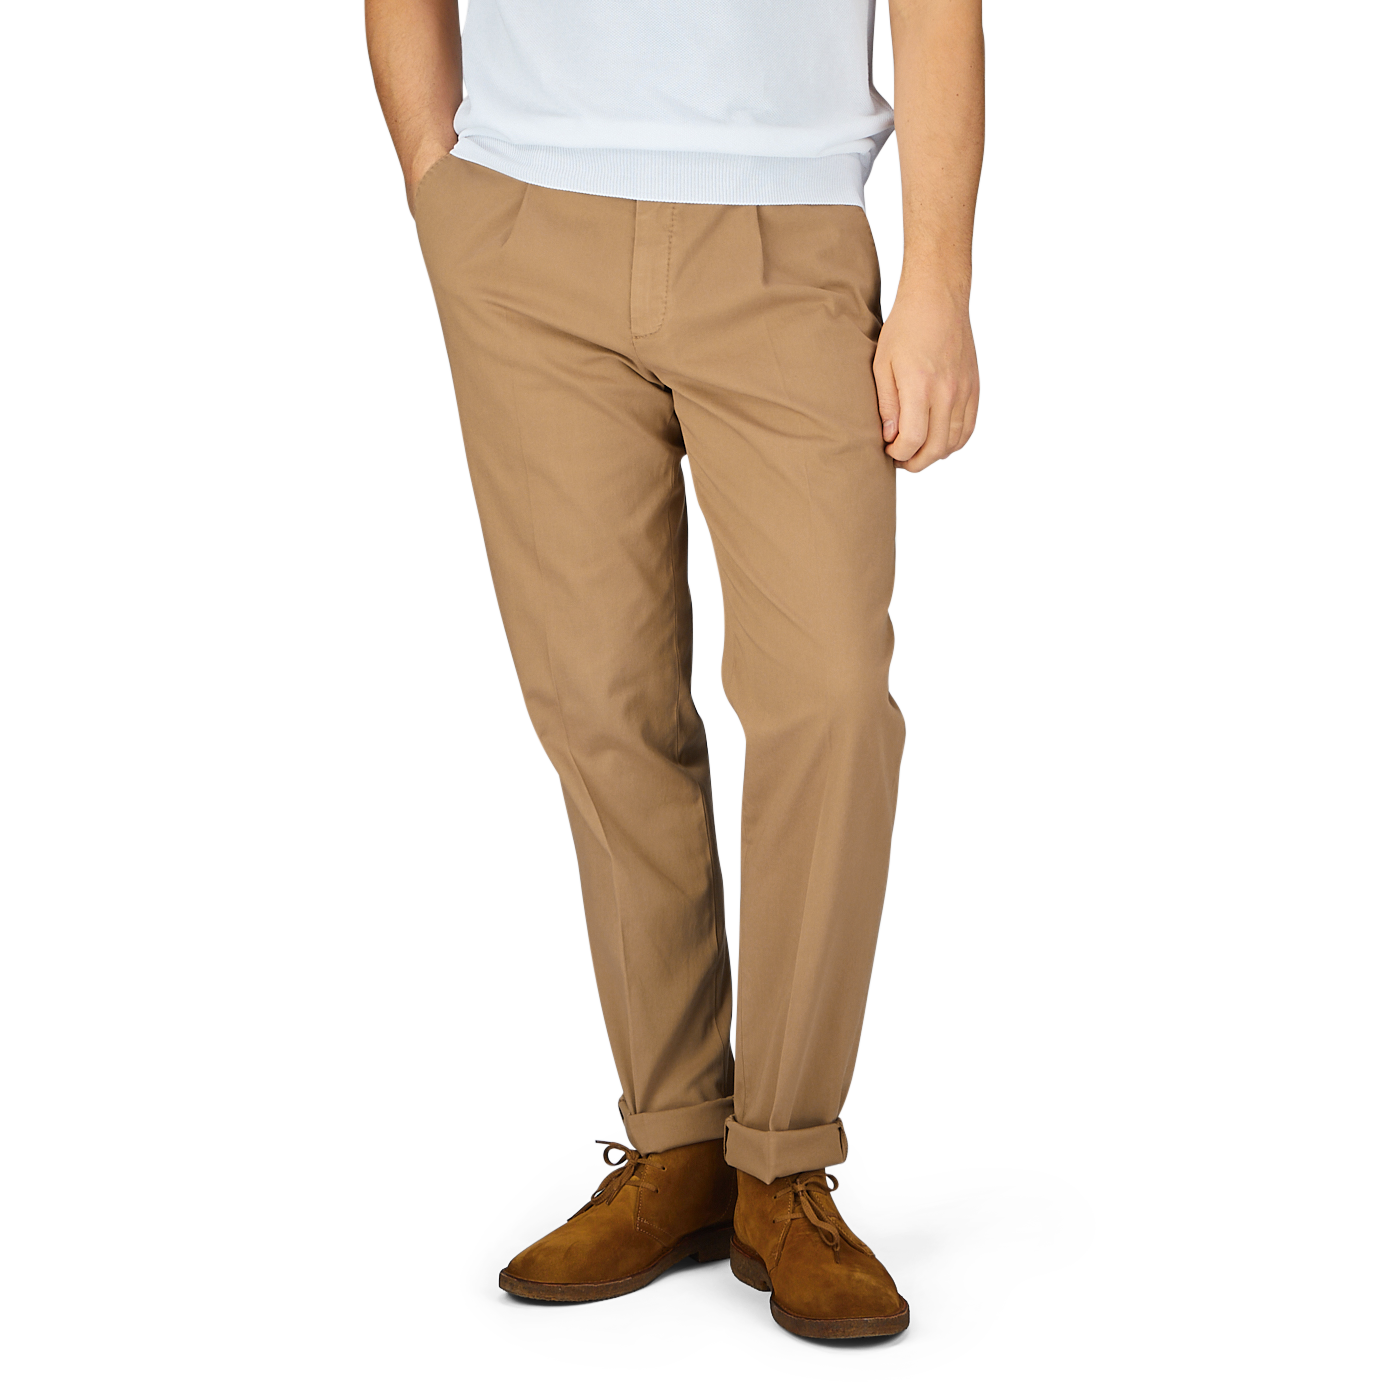 Man wearing Boglioli tobacco brown washed cotton pleated trousers and brown suede shoes.